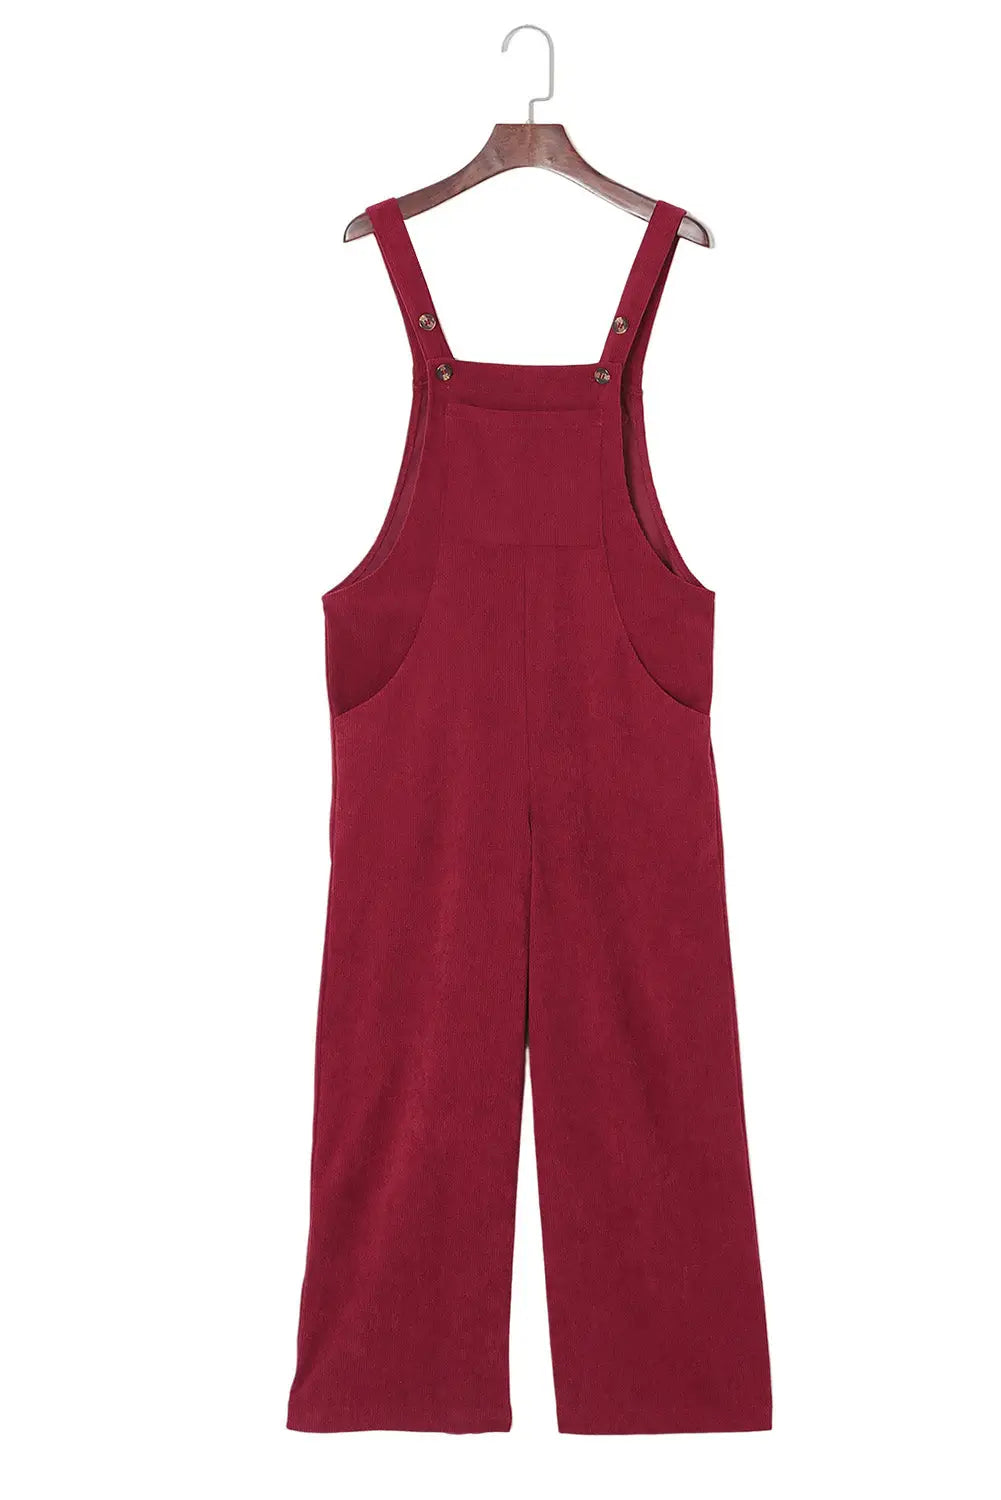 Red solid color corduroy wide leg bib overalls - jumpsuits & rompers